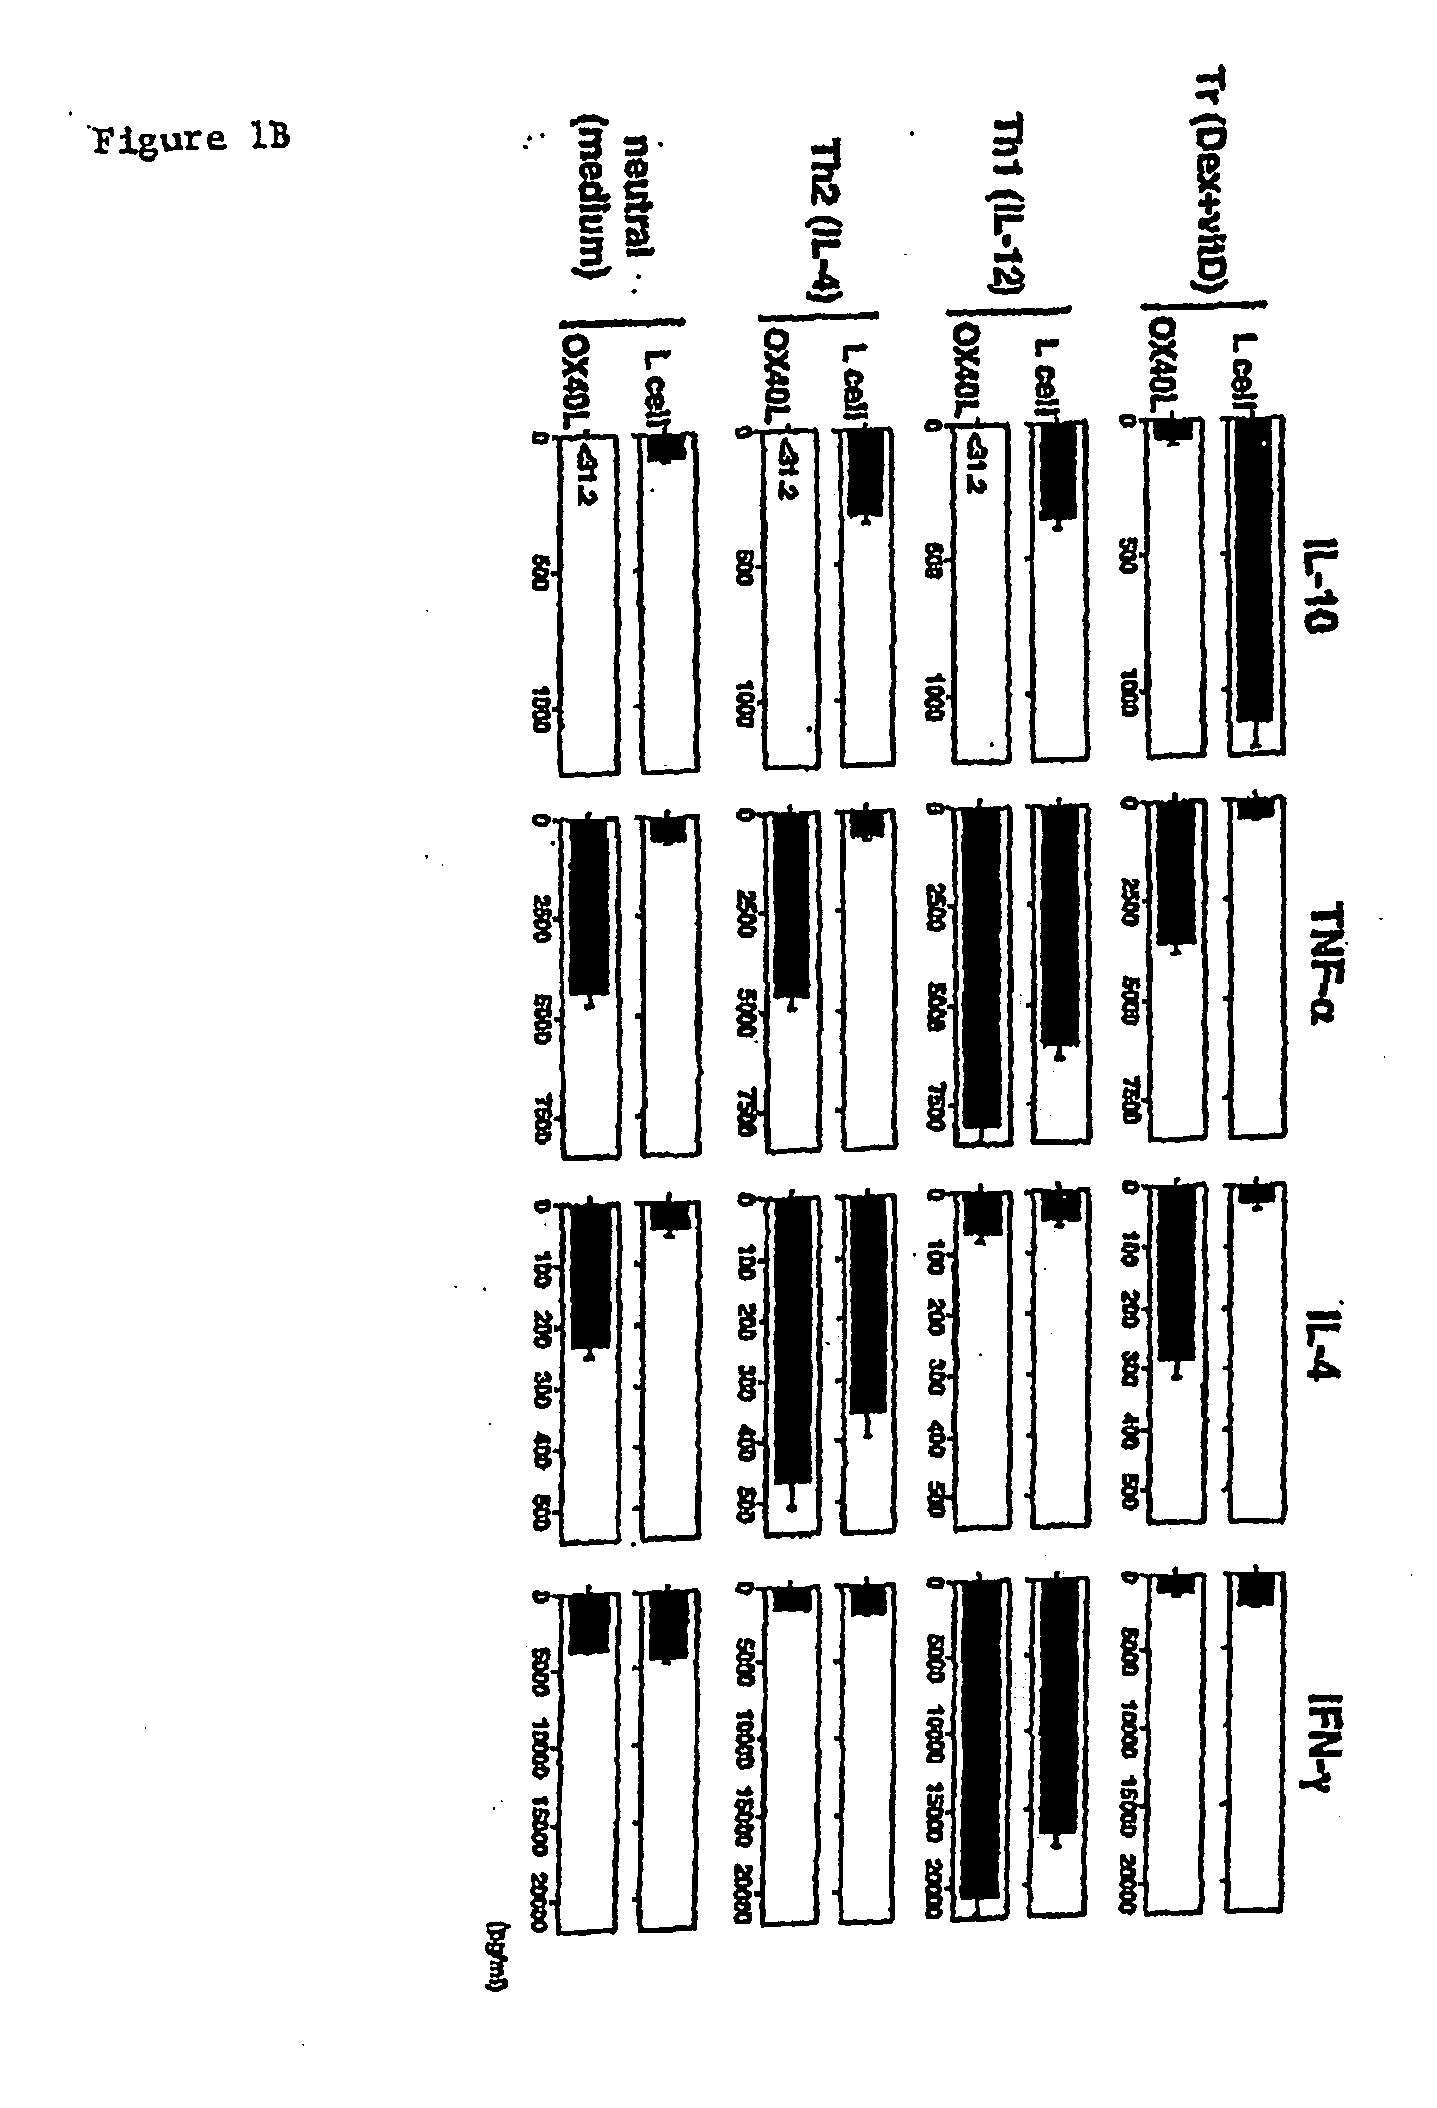 Methods to Treat Disease States by Influencing the Signaling of Ox-40-Receptors and High Throughput Screening Methods for Identifying Substances Therefor